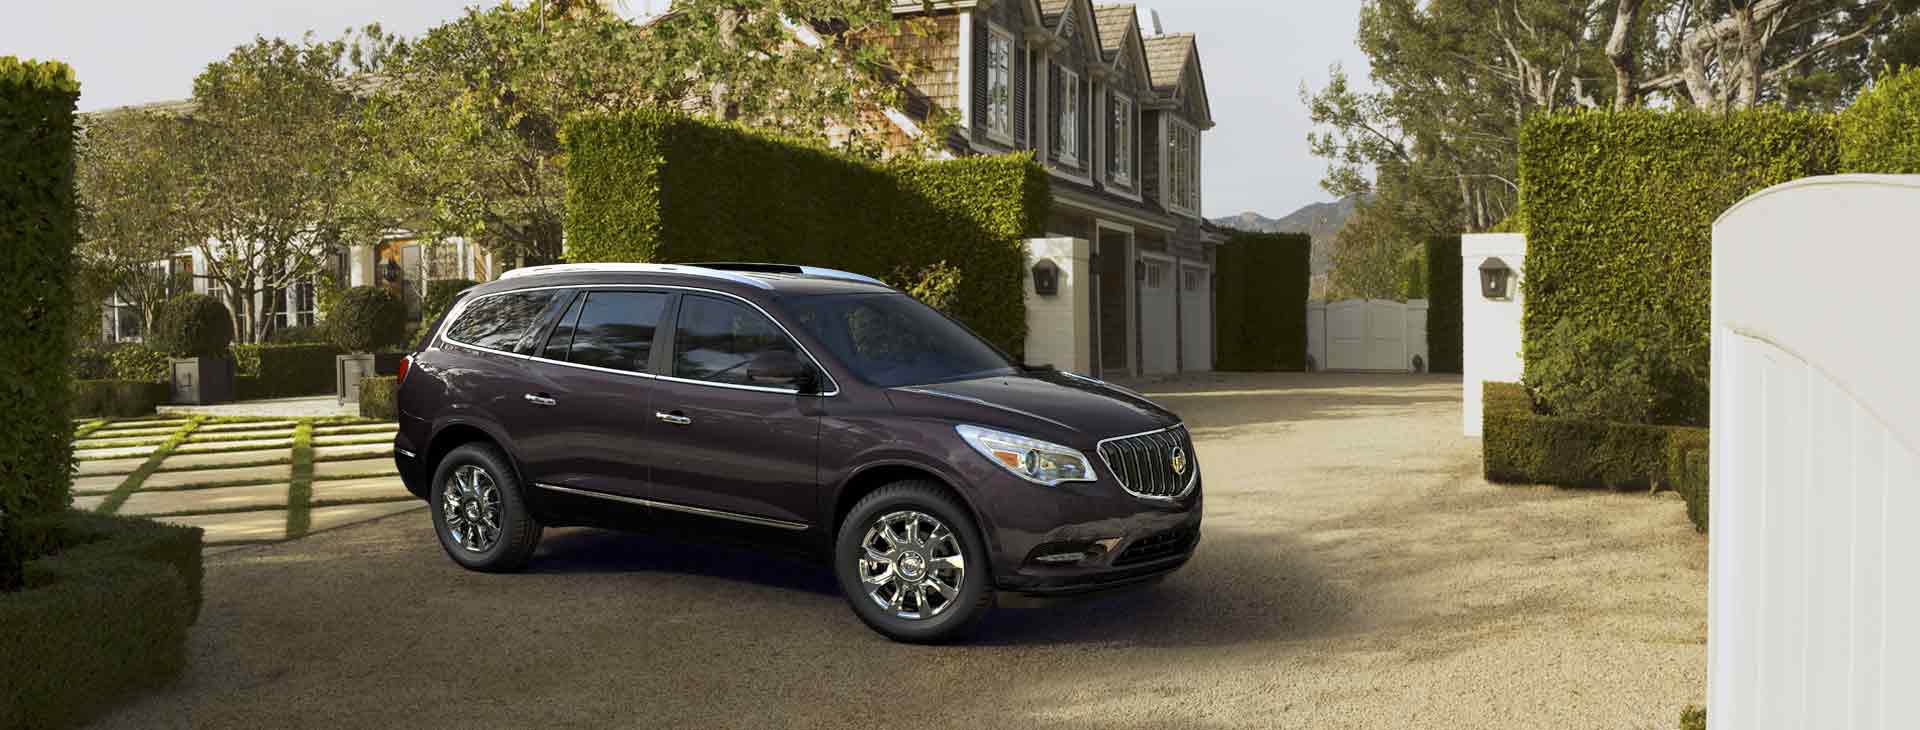 2016 Buick Enclave Info Pictures Specs Wiki Gm Authority